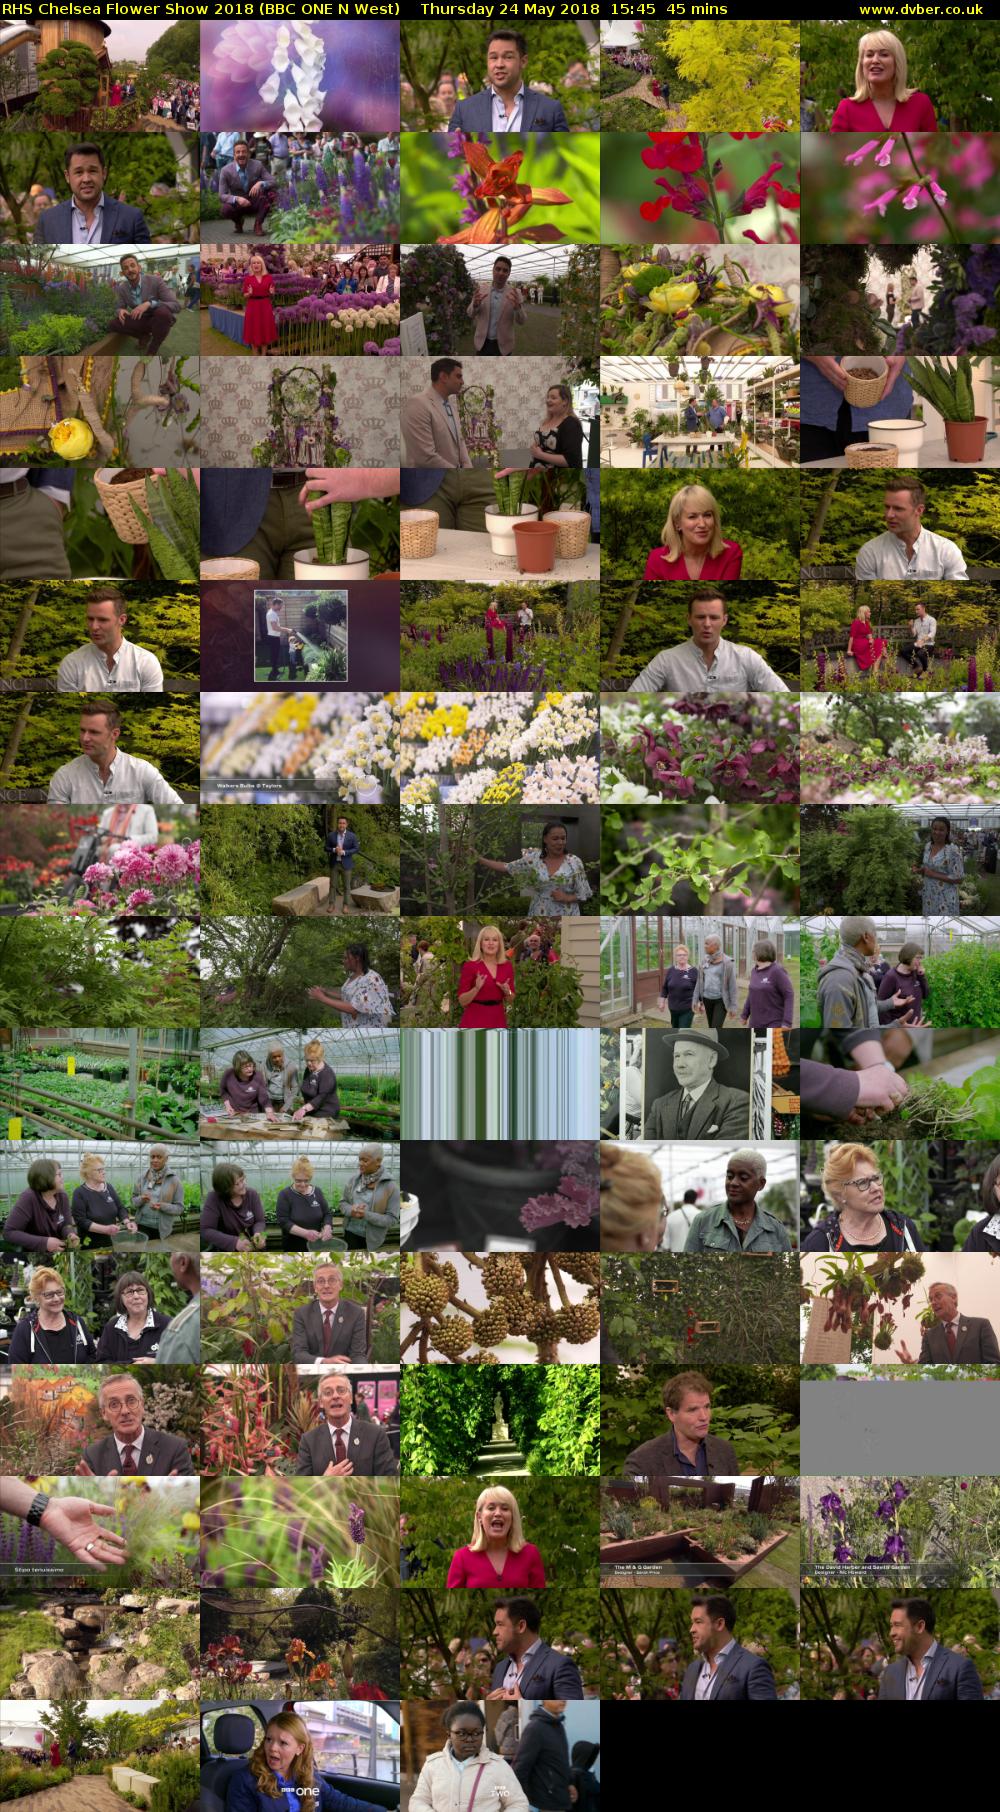 RHS Chelsea Flower Show 2018 (BBC ONE N West) Thursday 24 May 2018 15:45 - 16:30